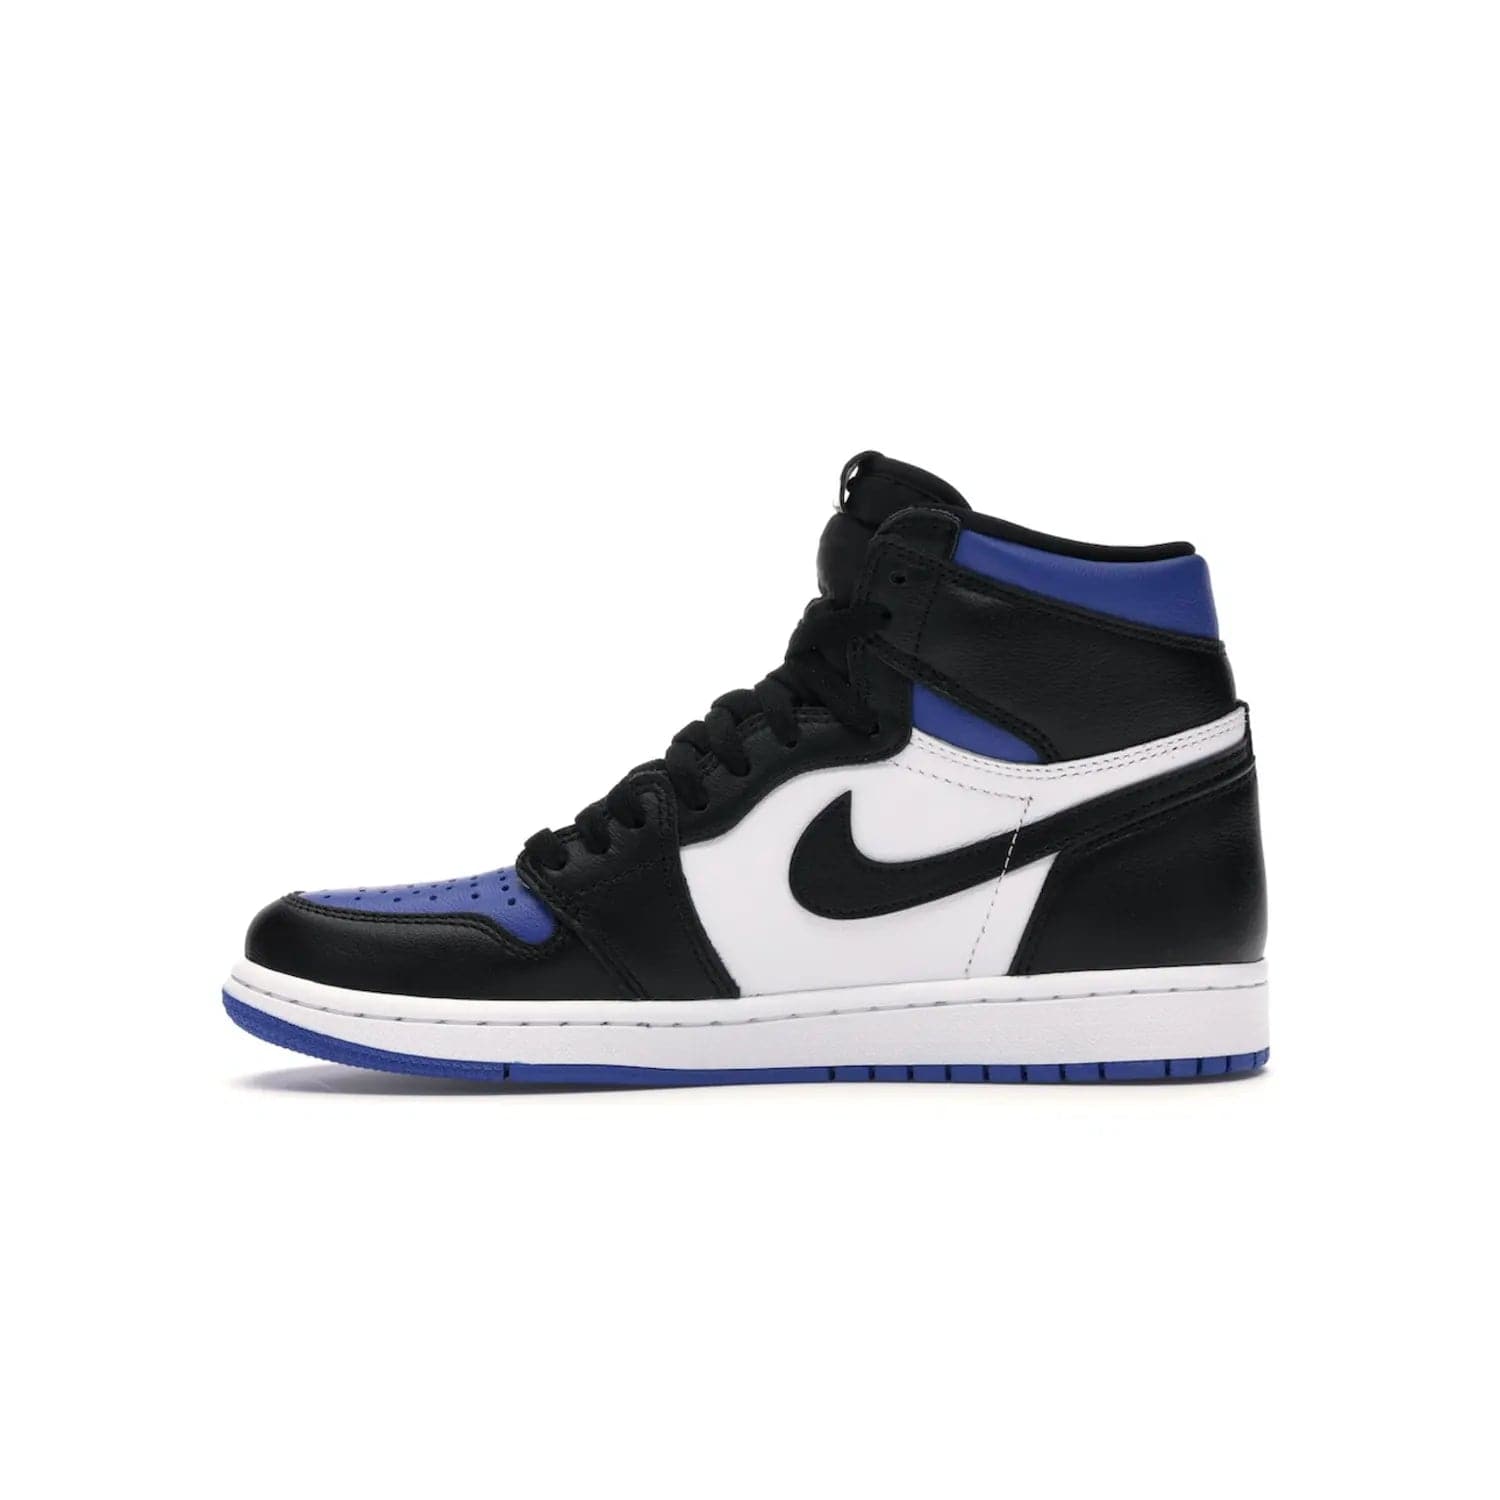 Jordan 1 Retro High Royal Toe - Image 19 - Only at www.BallersClubKickz.com - Refresh your look with the Jordan 1 Retro High Royal Toe. This classic AJ 1 sports a white and royal leather upper, black leather overlays, and branded leather tongue tag. Pick up today and set the streets ablaze.